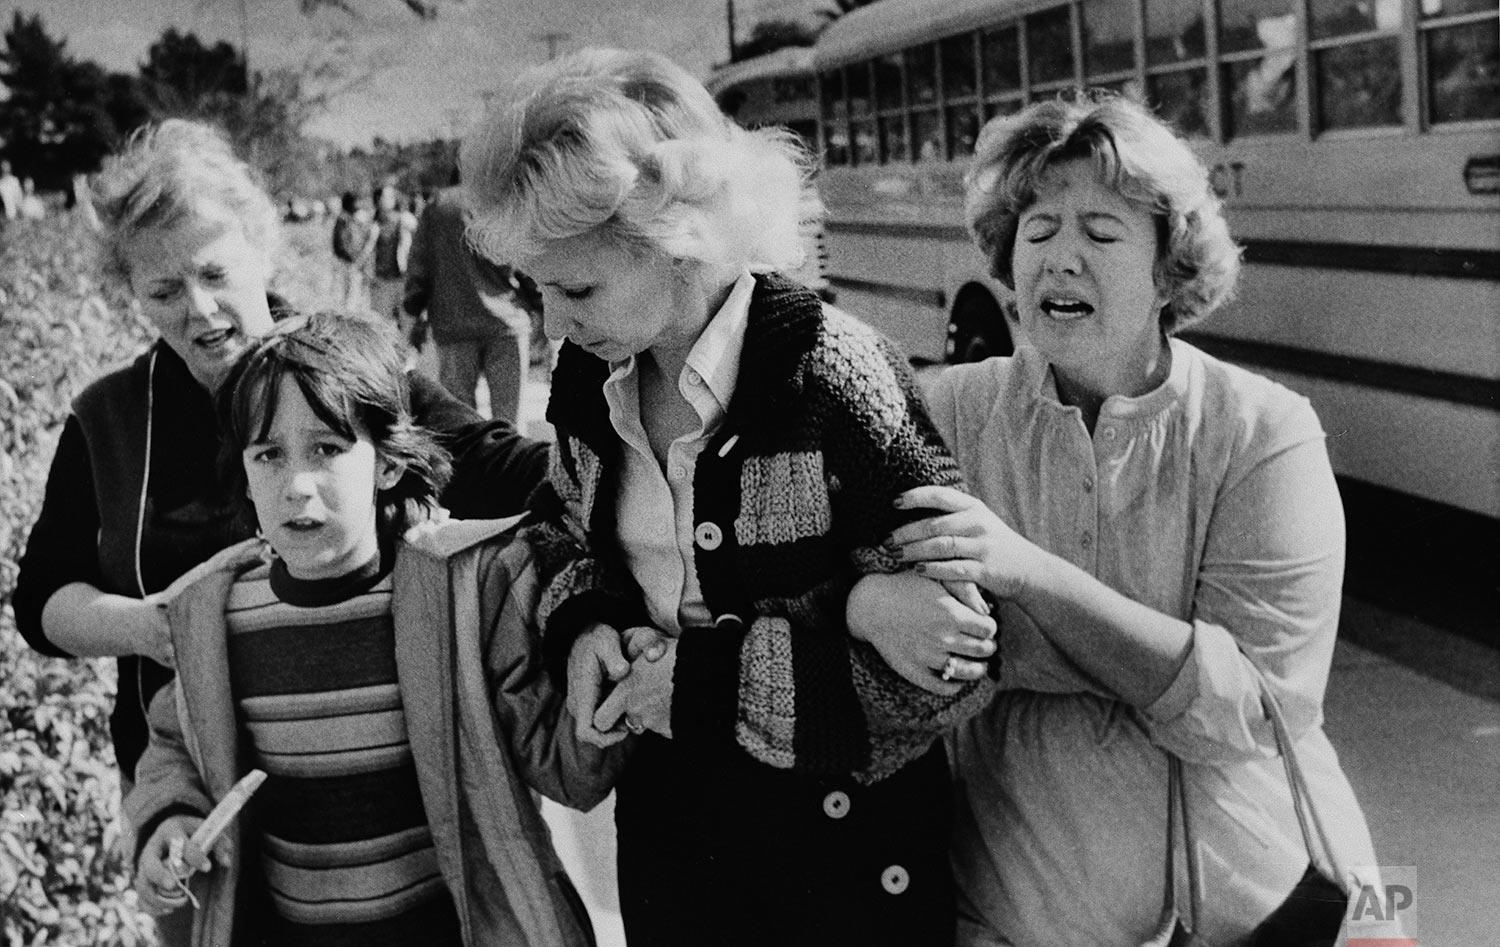  Unidentified women greet a young boy who was evacuated by bus to a nearby junior high school in San Diego from the schoolyard of the Cleveland Elementary School after a sniper opened fire on the schoolyard, Jan. 29, 1979. (AP Photo/Lennox McLendon) 